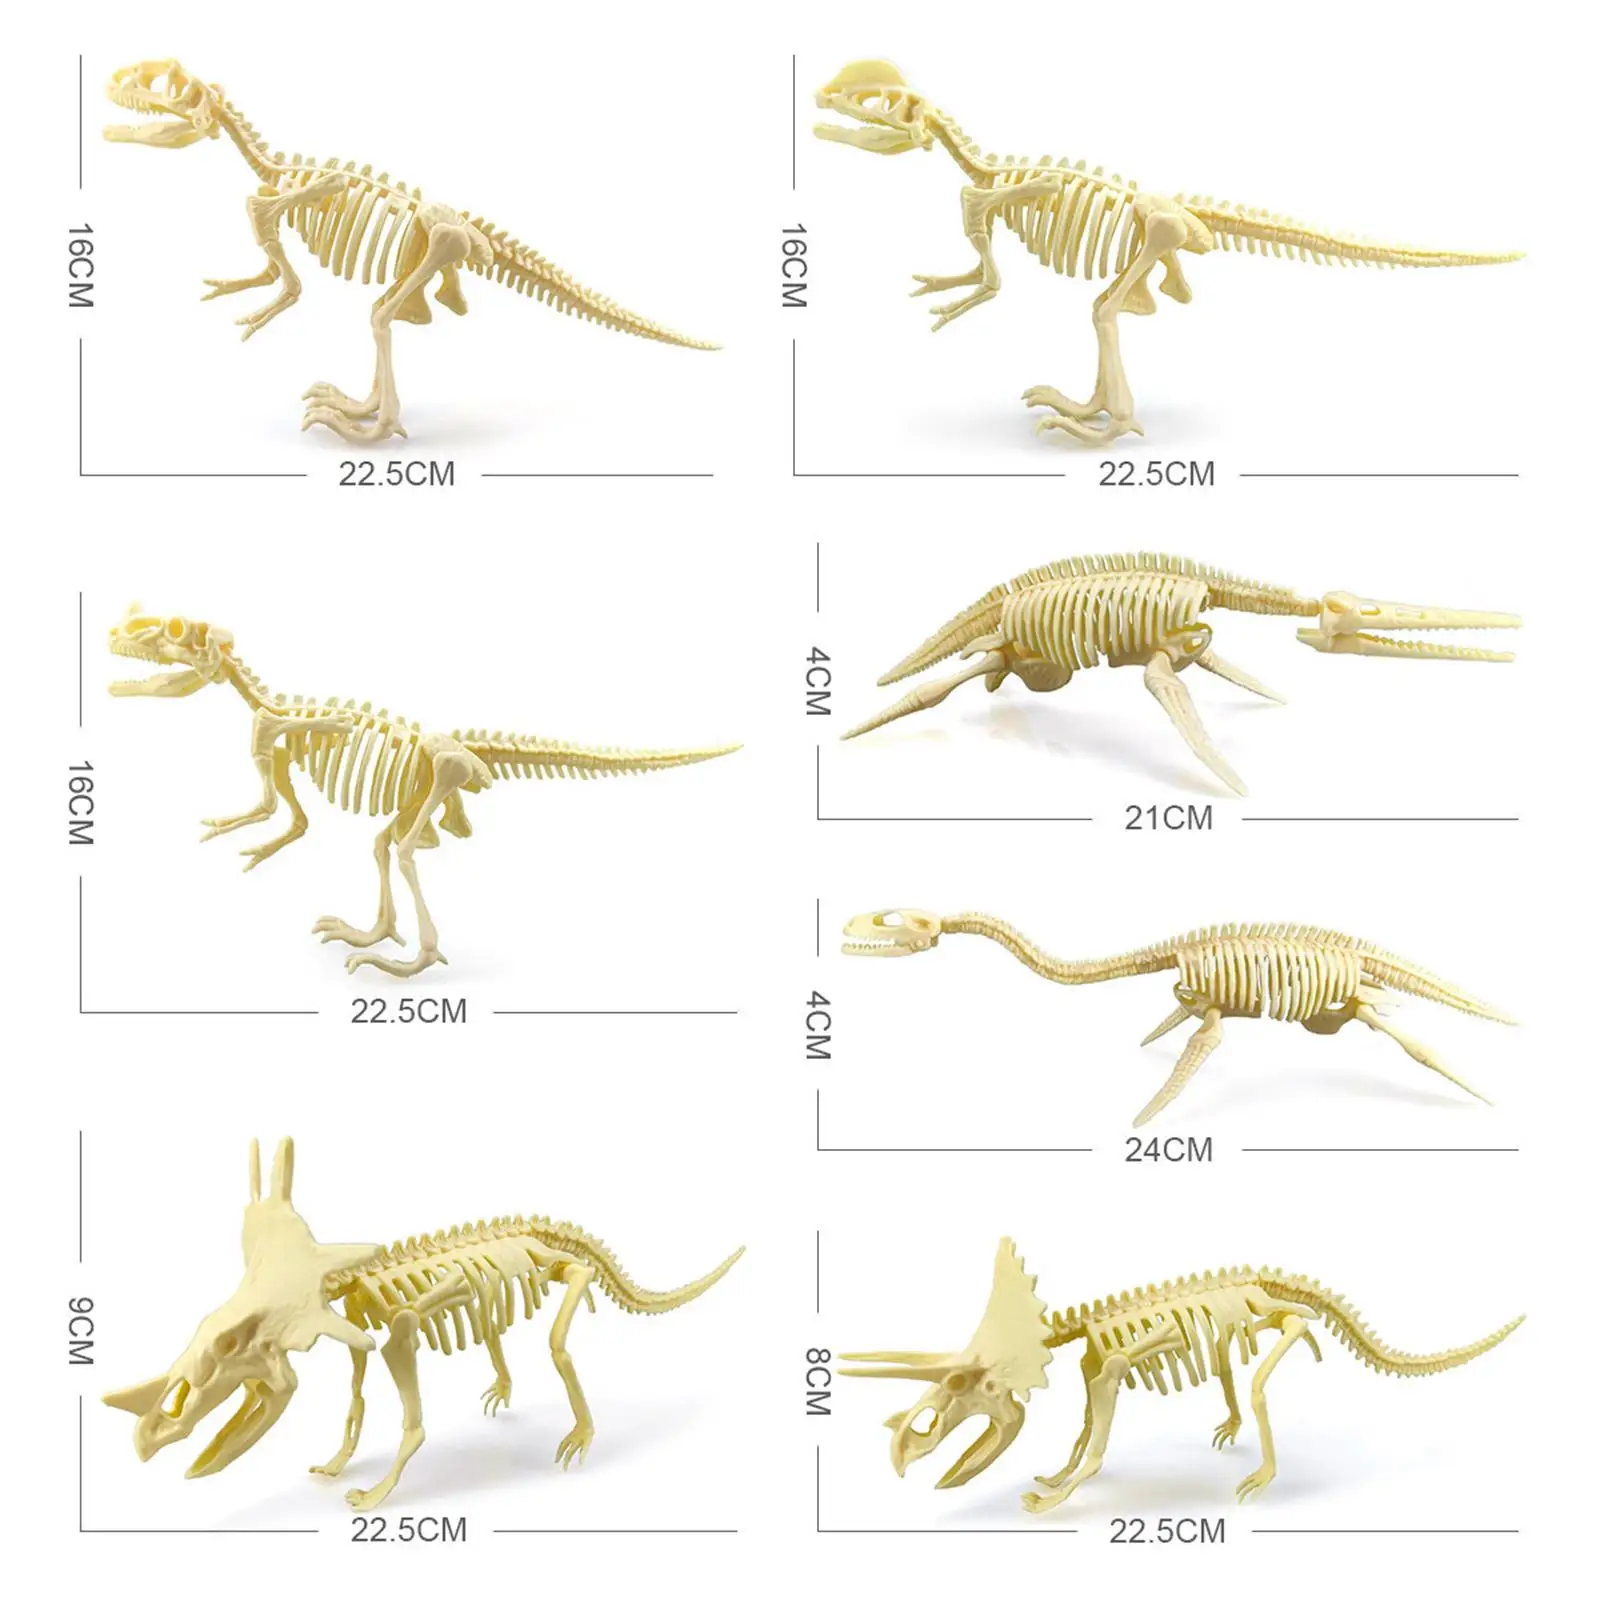 7 Pieces Simulation Dinosaur Skeleton Carfts Collection Party Favor Assorted Bones Figures Toys Model Toys for Children Gifts